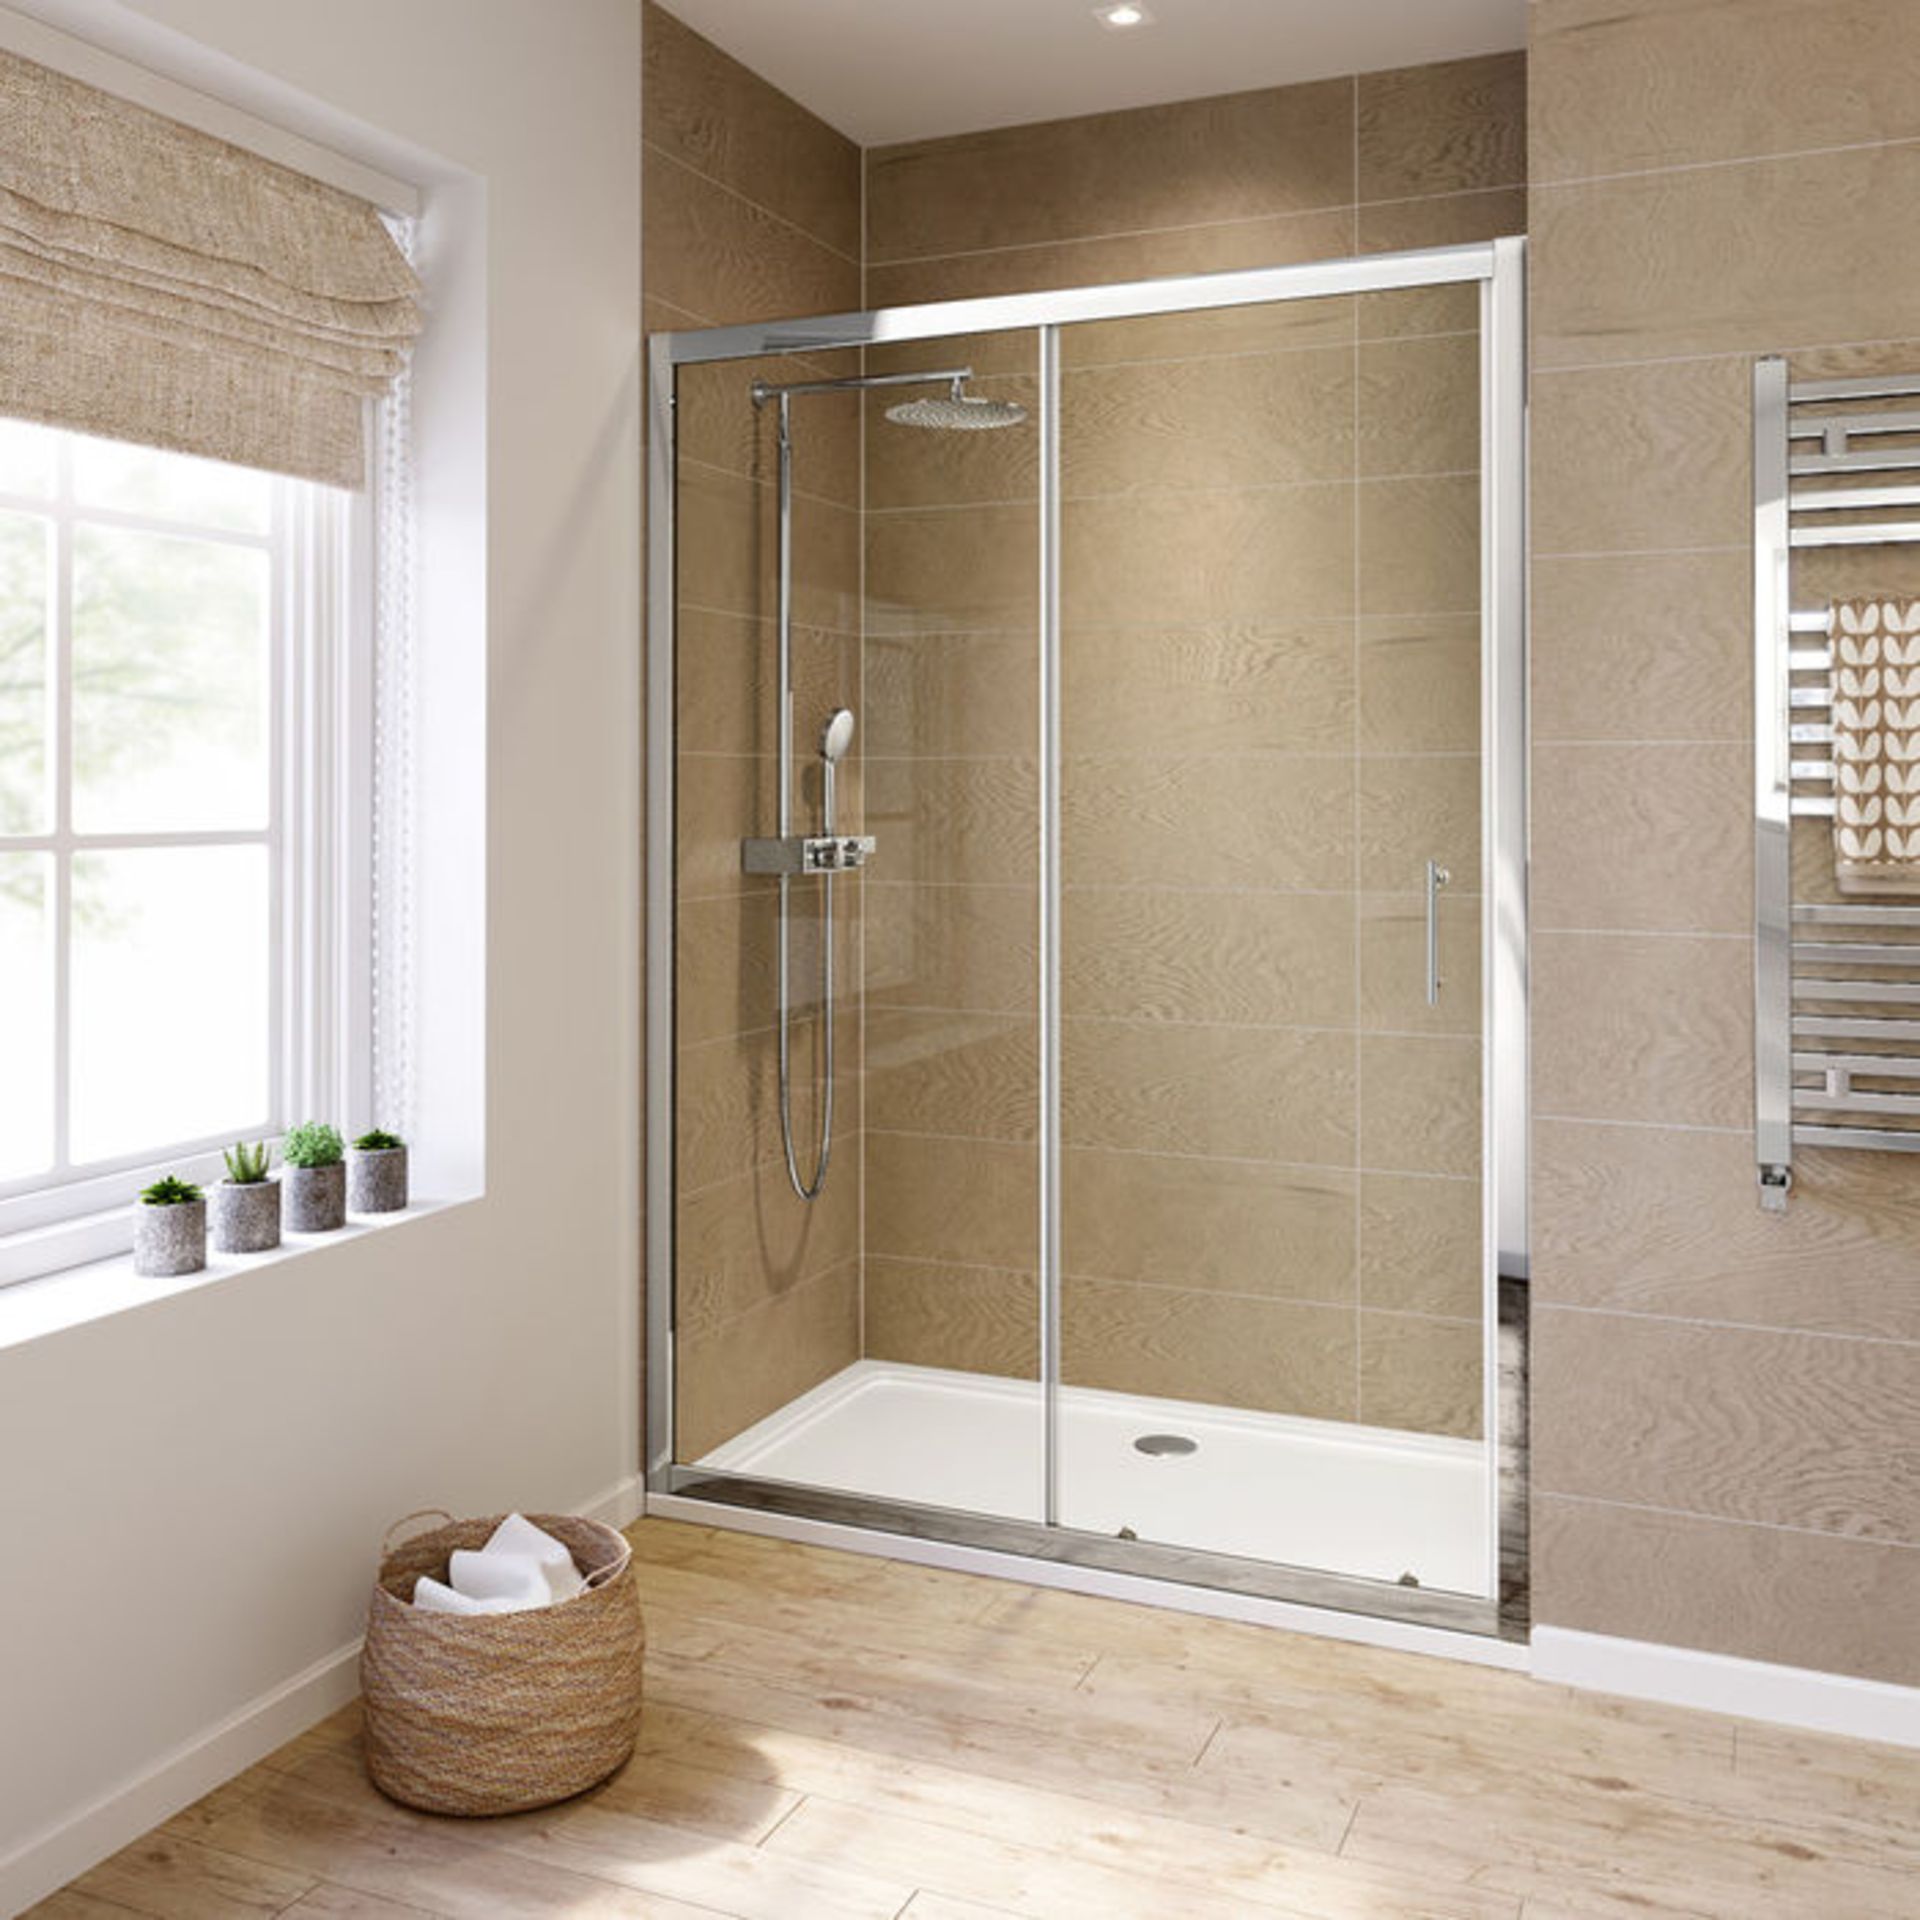 (ZA20) 1400mm - 6mm - Elements Sliding Shower Door. RRP £299.99._x00D_6mm Safety Glass_x00D_Fully - Image 3 of 3